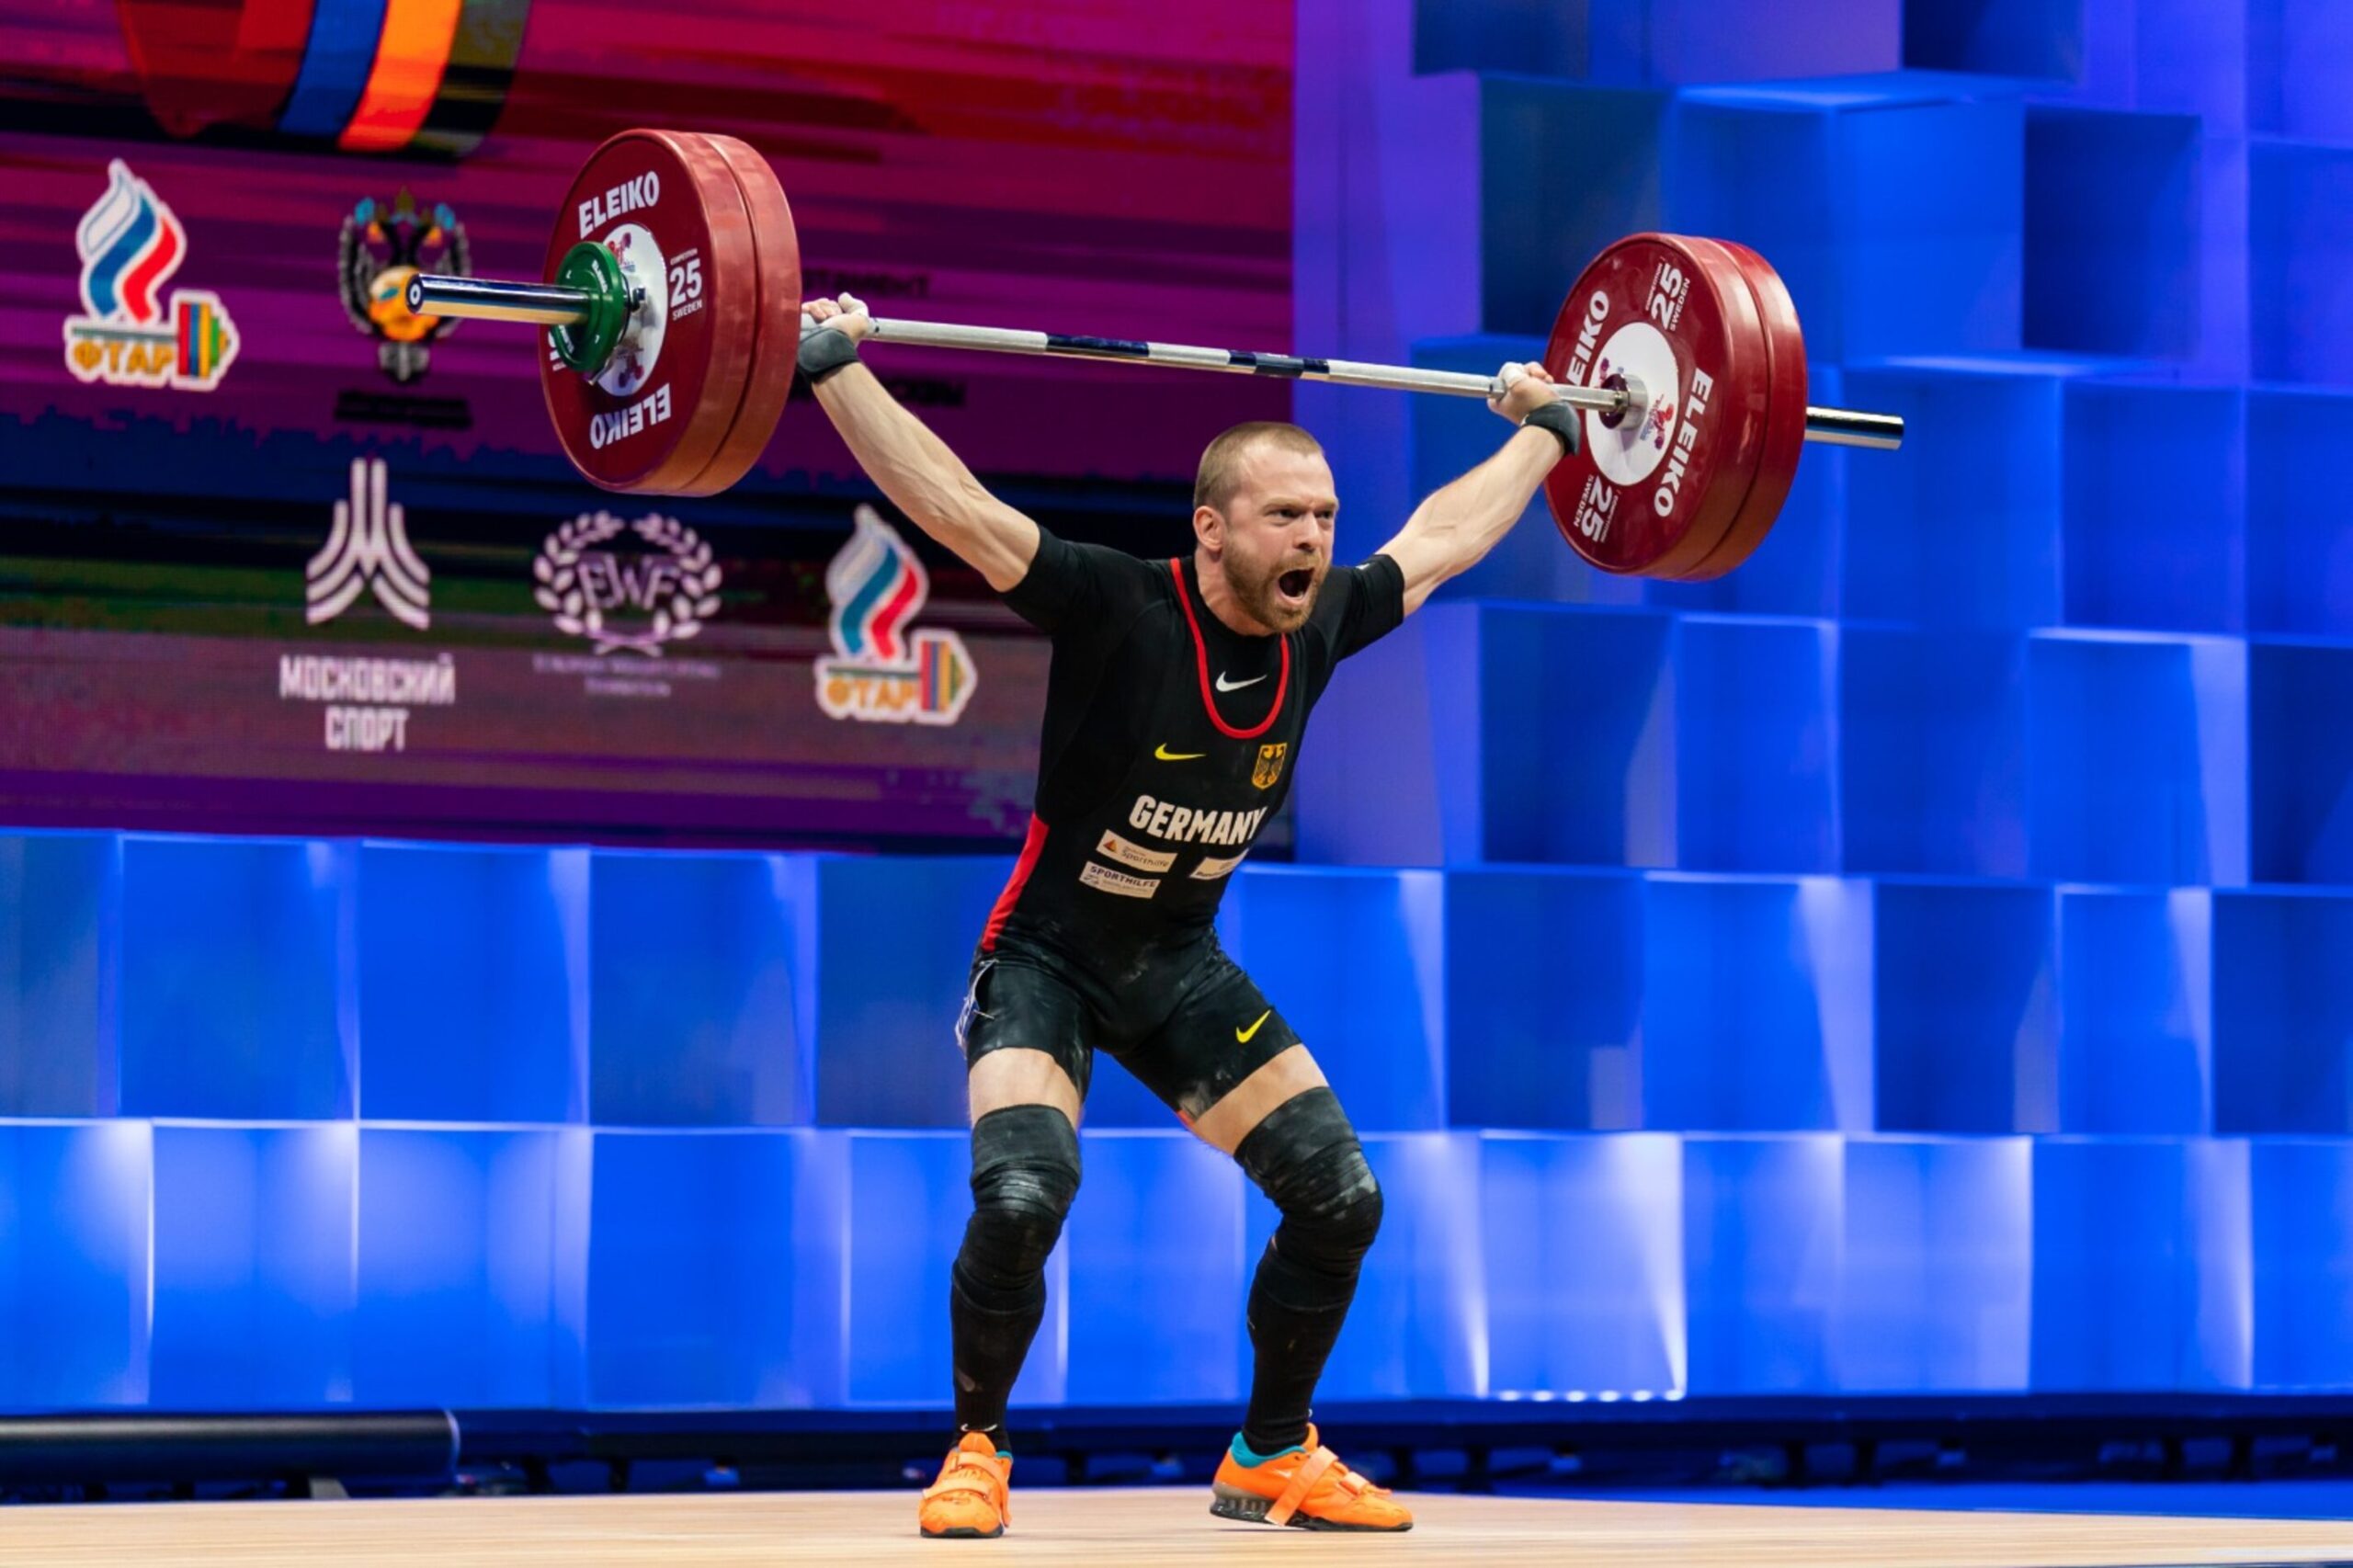 european weightlifting championships 2022 live